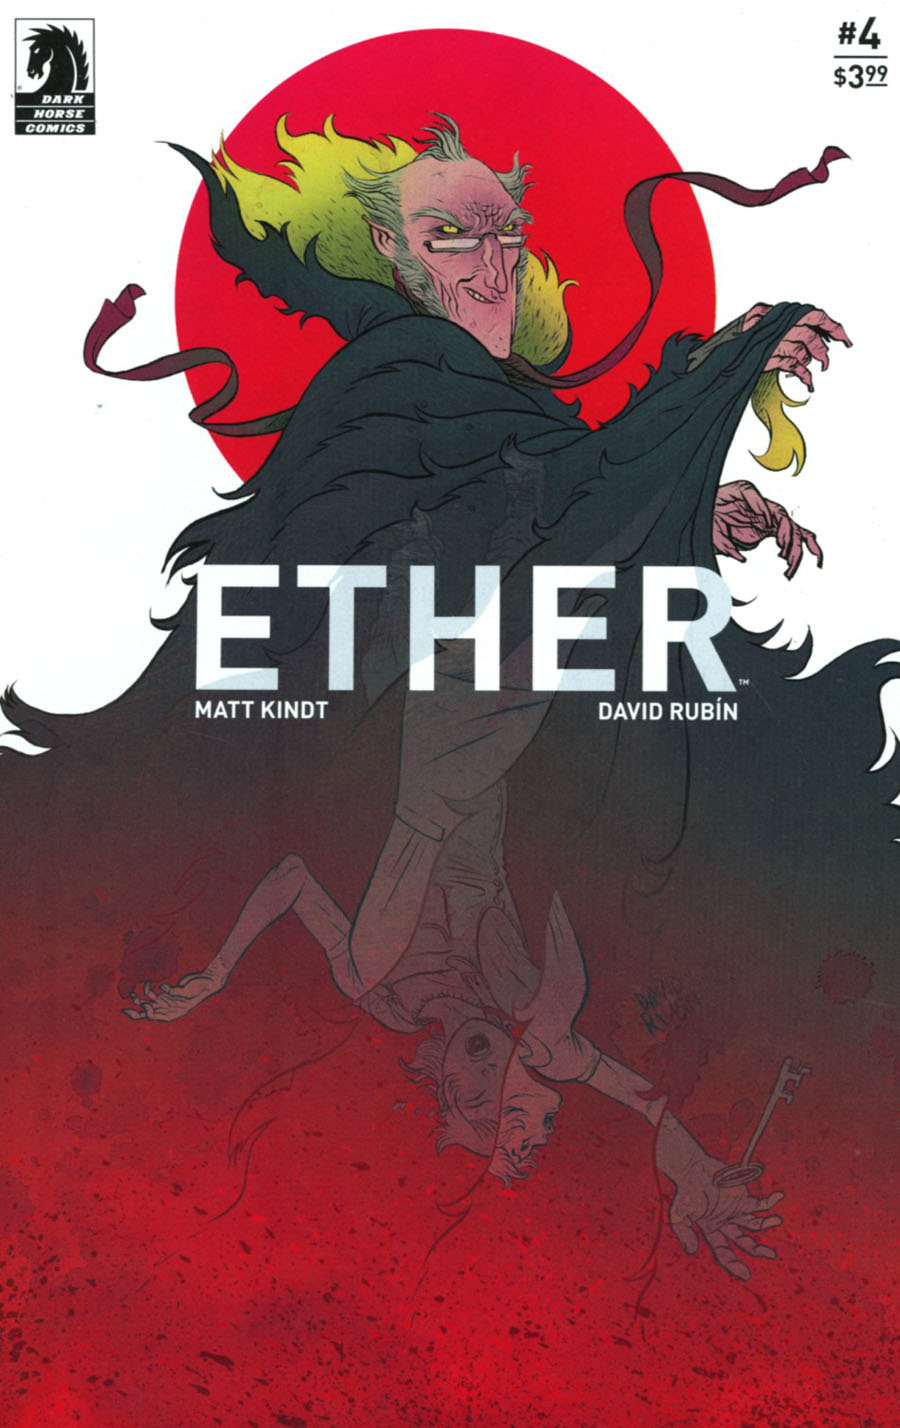 Ether #4